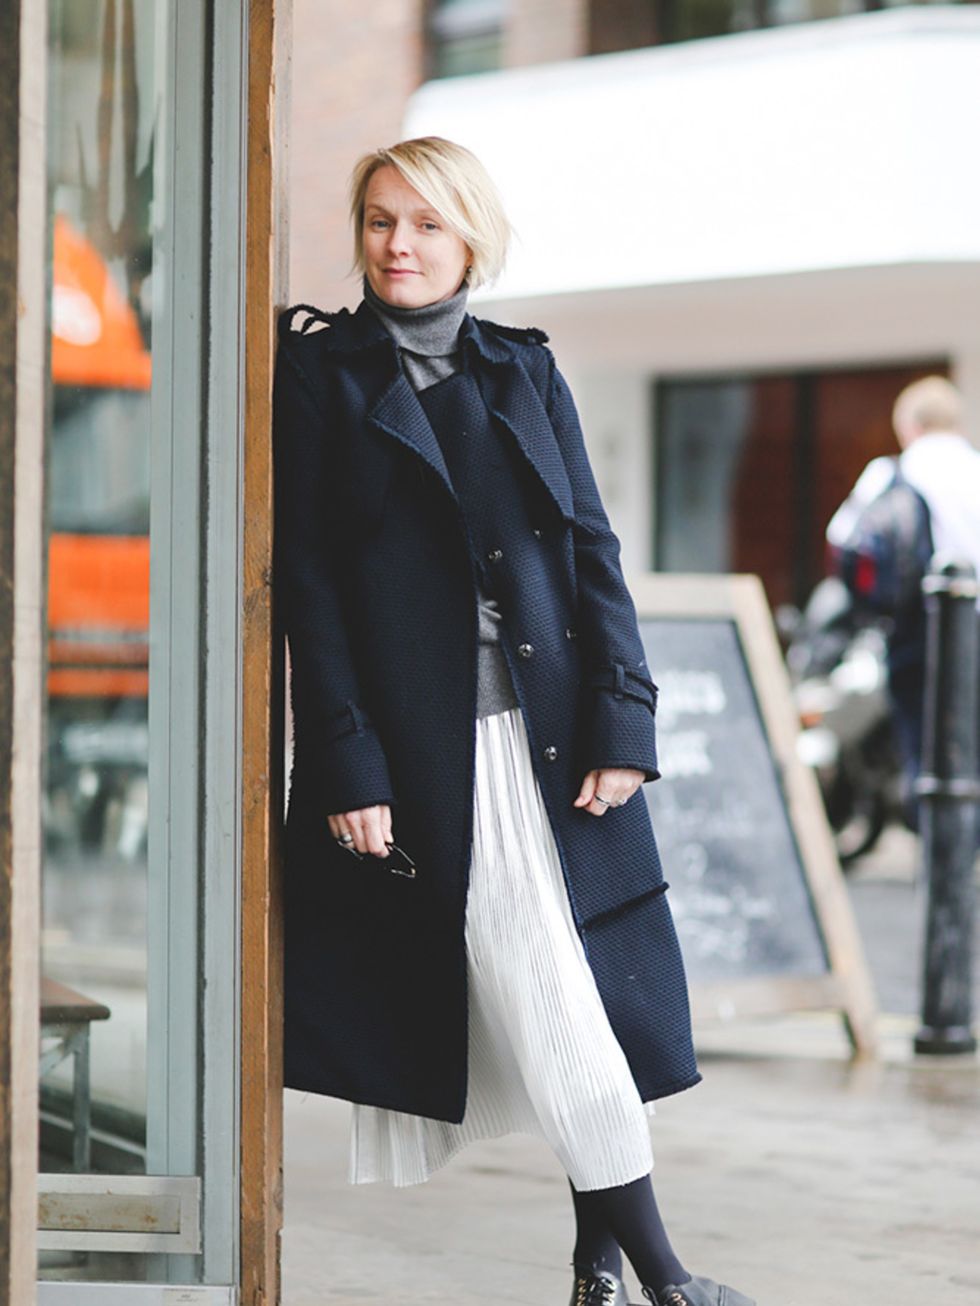 <p>Lorraine Candy<br />
Editor-in-Chief</p>

<p>Erdem coat, Jigsaw skirt, Cos polo neck, Topshop shoes and Tom Ford sunglasses. </p>